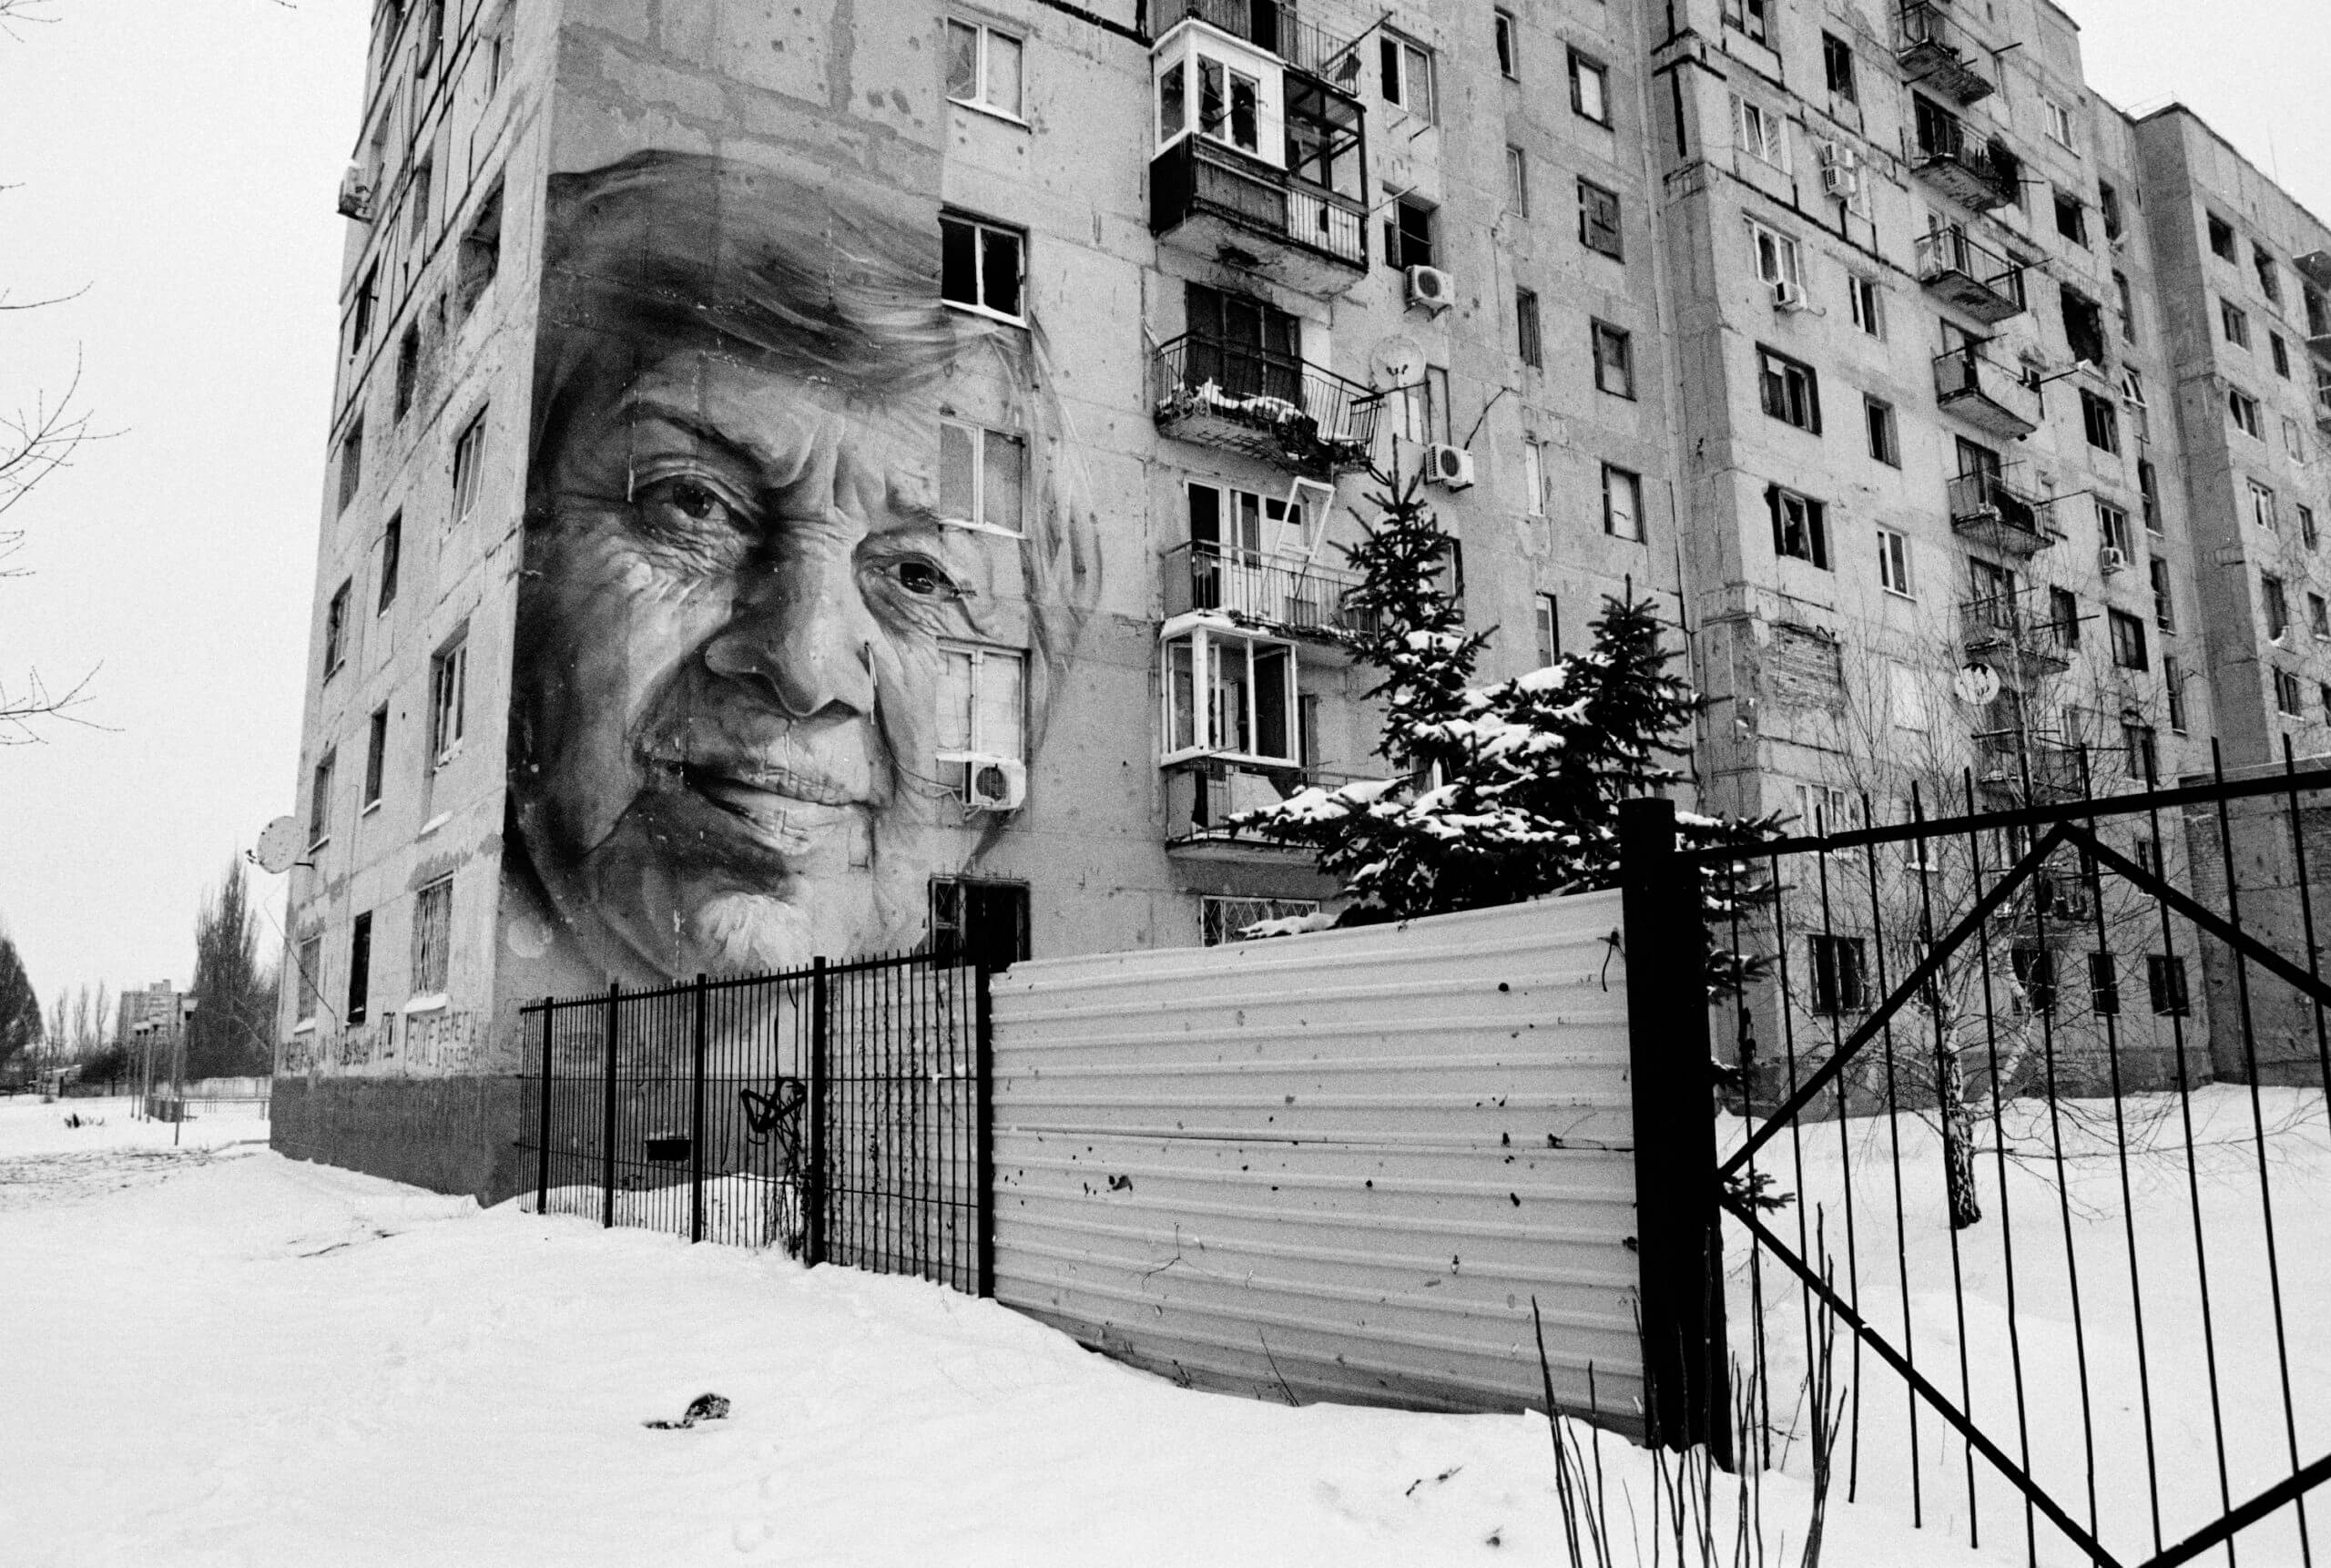 Tower block with street art of old woman's face